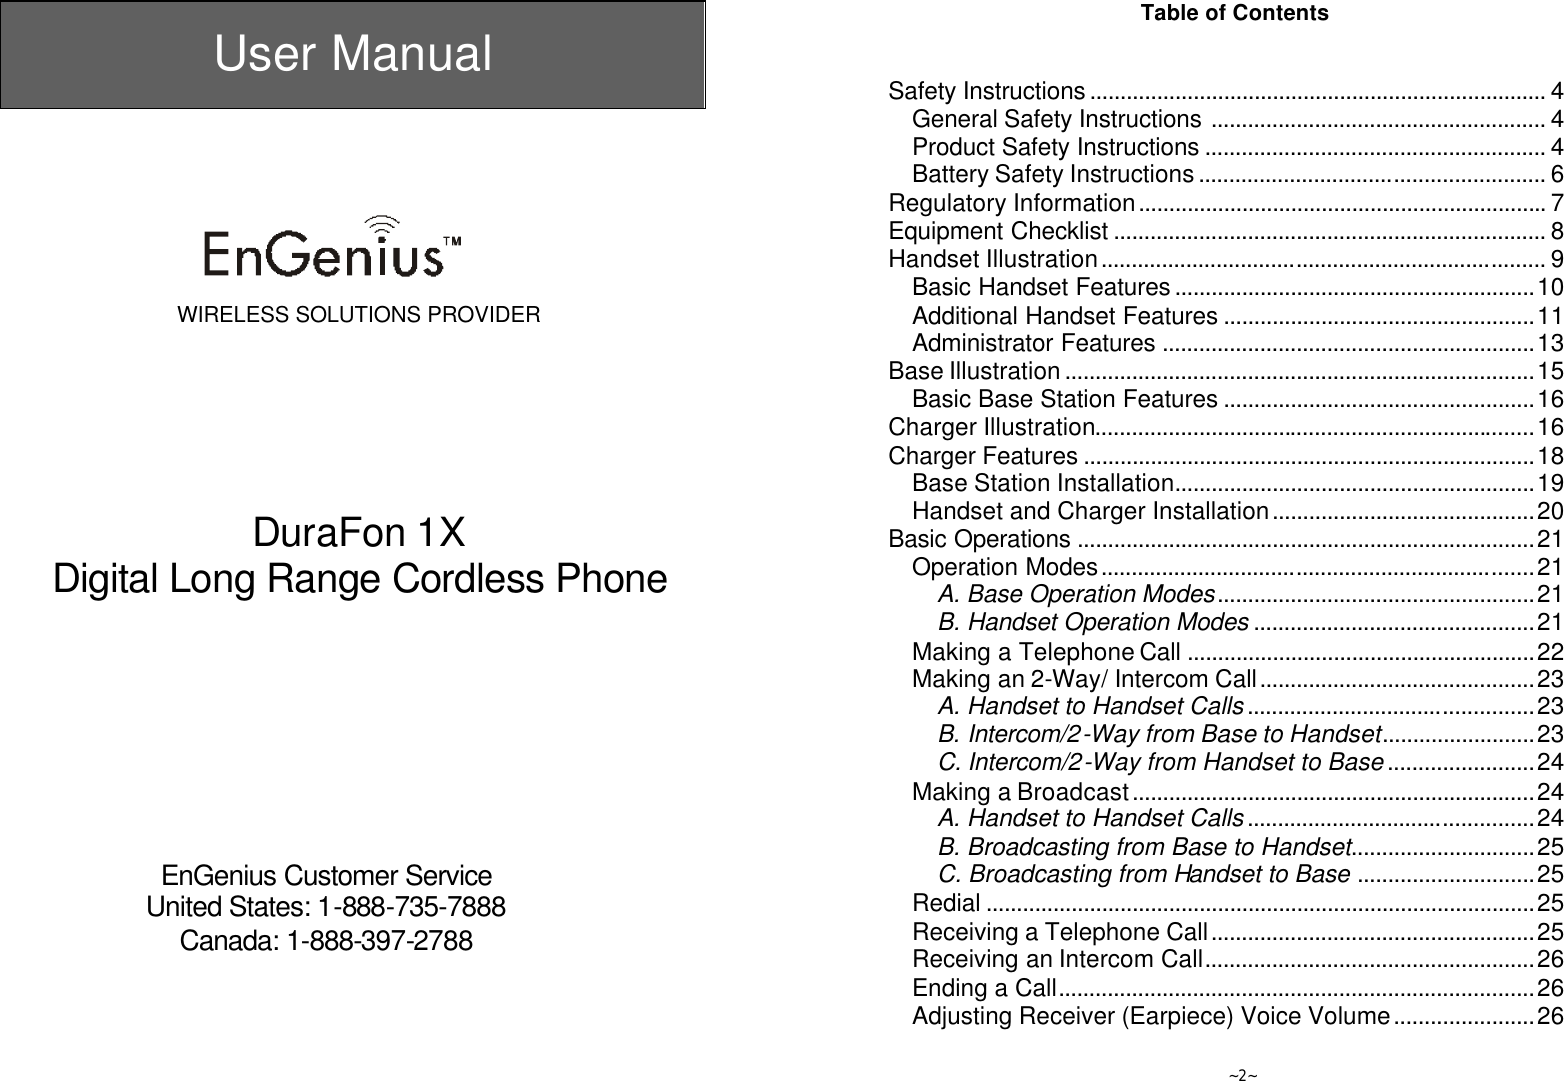  User Manual       WIRELESS SOLUTIONS PROVIDER        DuraFon 1X Digital Long Range Cordless Phone           EnGenius Customer Service United States: 1-888-735-7888 Canada: 1-888-397-2788   ~2~ Table of Contents   Safety Instructions........................................................................... 4 General Safety Instructions ....................................................... 4 Product Safety Instructions ........................................................ 4 Battery Safety Instructions......................................................... 6 Regulatory Information................................................................... 7 Equipment Checklist ....................................................................... 8 Handset Illustration......................................................................... 9 Basic Handset Features...........................................................10 Additional Handset Features ...................................................11 Administrator Features .............................................................13 Base Illustration.............................................................................15 Basic Base Station Features ...................................................16 Charger Illustration........................................................................16 Charger Features ..........................................................................18 Base Station Installation...........................................................19 Handset and Charger Installation...........................................20 Basic Operations ...........................................................................21 Operation Modes.......................................................................21 A. Base Operation Modes....................................................21 B. Handset Operation Modes ..............................................21 Making a Telephone Call .........................................................22 Making an 2-Way/ Intercom Call.............................................23 A. Handset to Handset Calls...............................................23 B. Intercom/2-Way from Base to Handset.........................23 C. Intercom/2-Way from Handset to Base........................24 Making a Broadcast..................................................................24 A. Handset to Handset Calls...............................................24 B. Broadcasting from Base to Handset..............................25 C. Broadcasting from Handset to Base .............................25 Redial ..........................................................................................25 Receiving a Telephone Call.....................................................25 Receiving an Intercom Call......................................................26 Ending a Call..............................................................................26 Adjusting Receiver (Earpiece) Voice Volume.......................26 